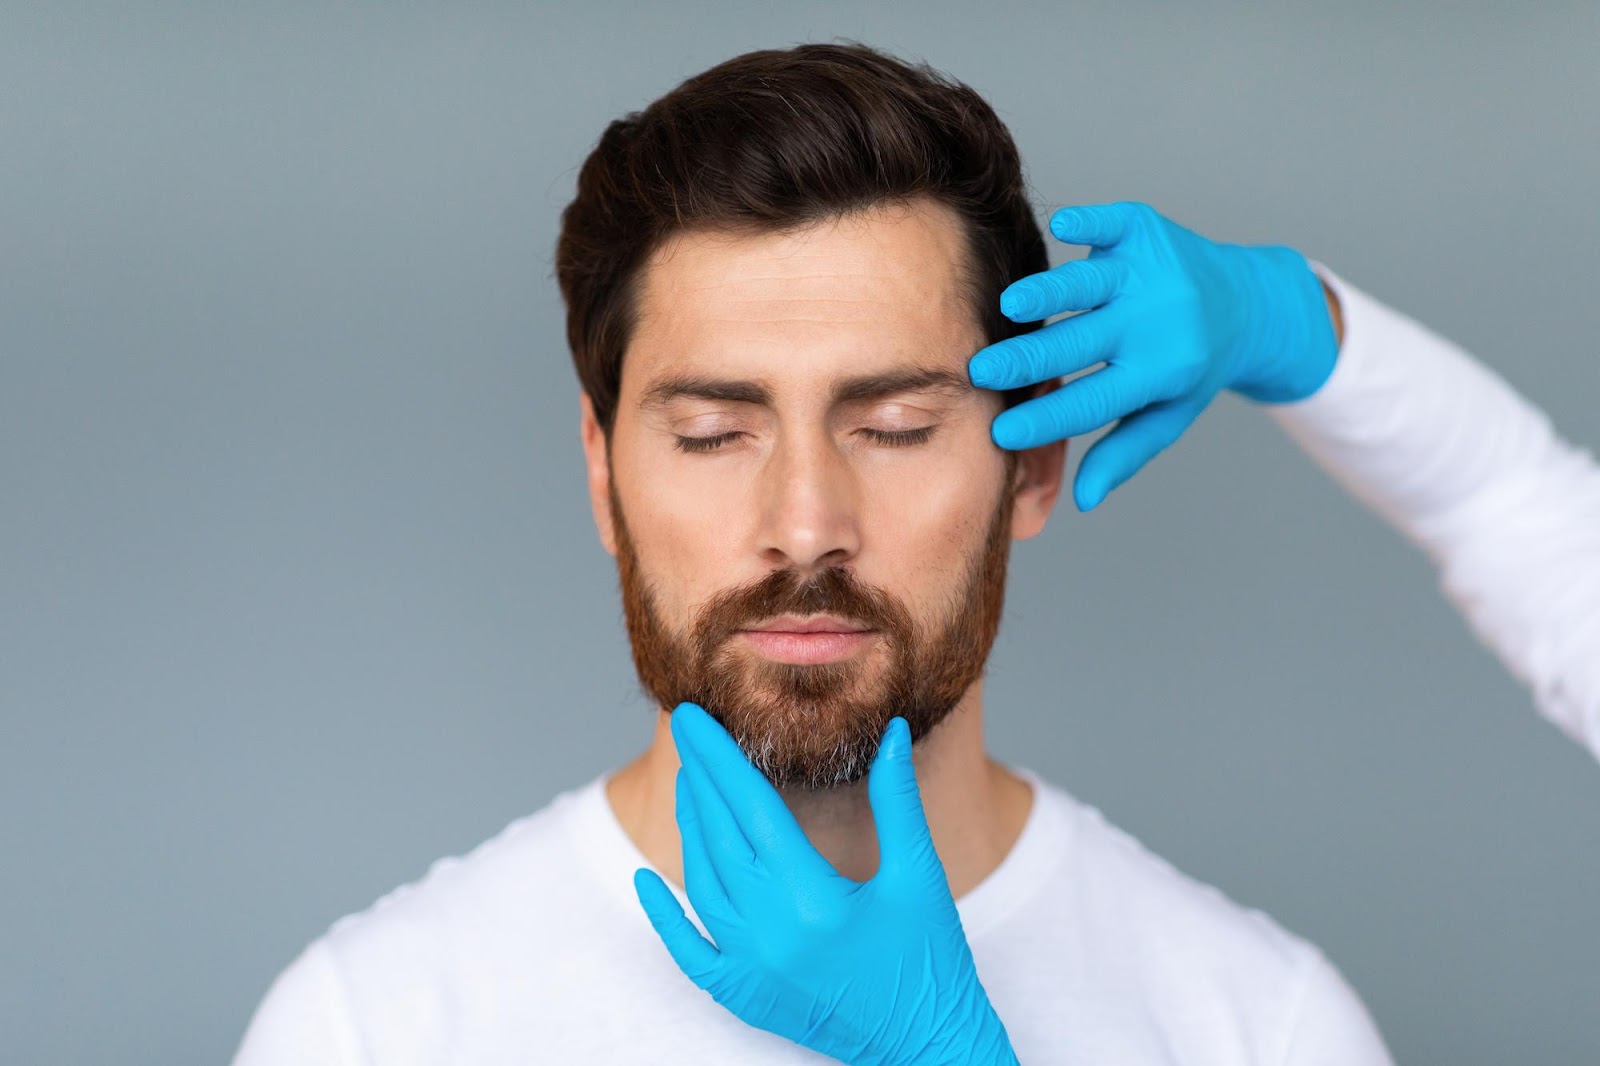 Aesthetic specialist analyzing the facial structure of a male patient interested in Radiesse treatment.